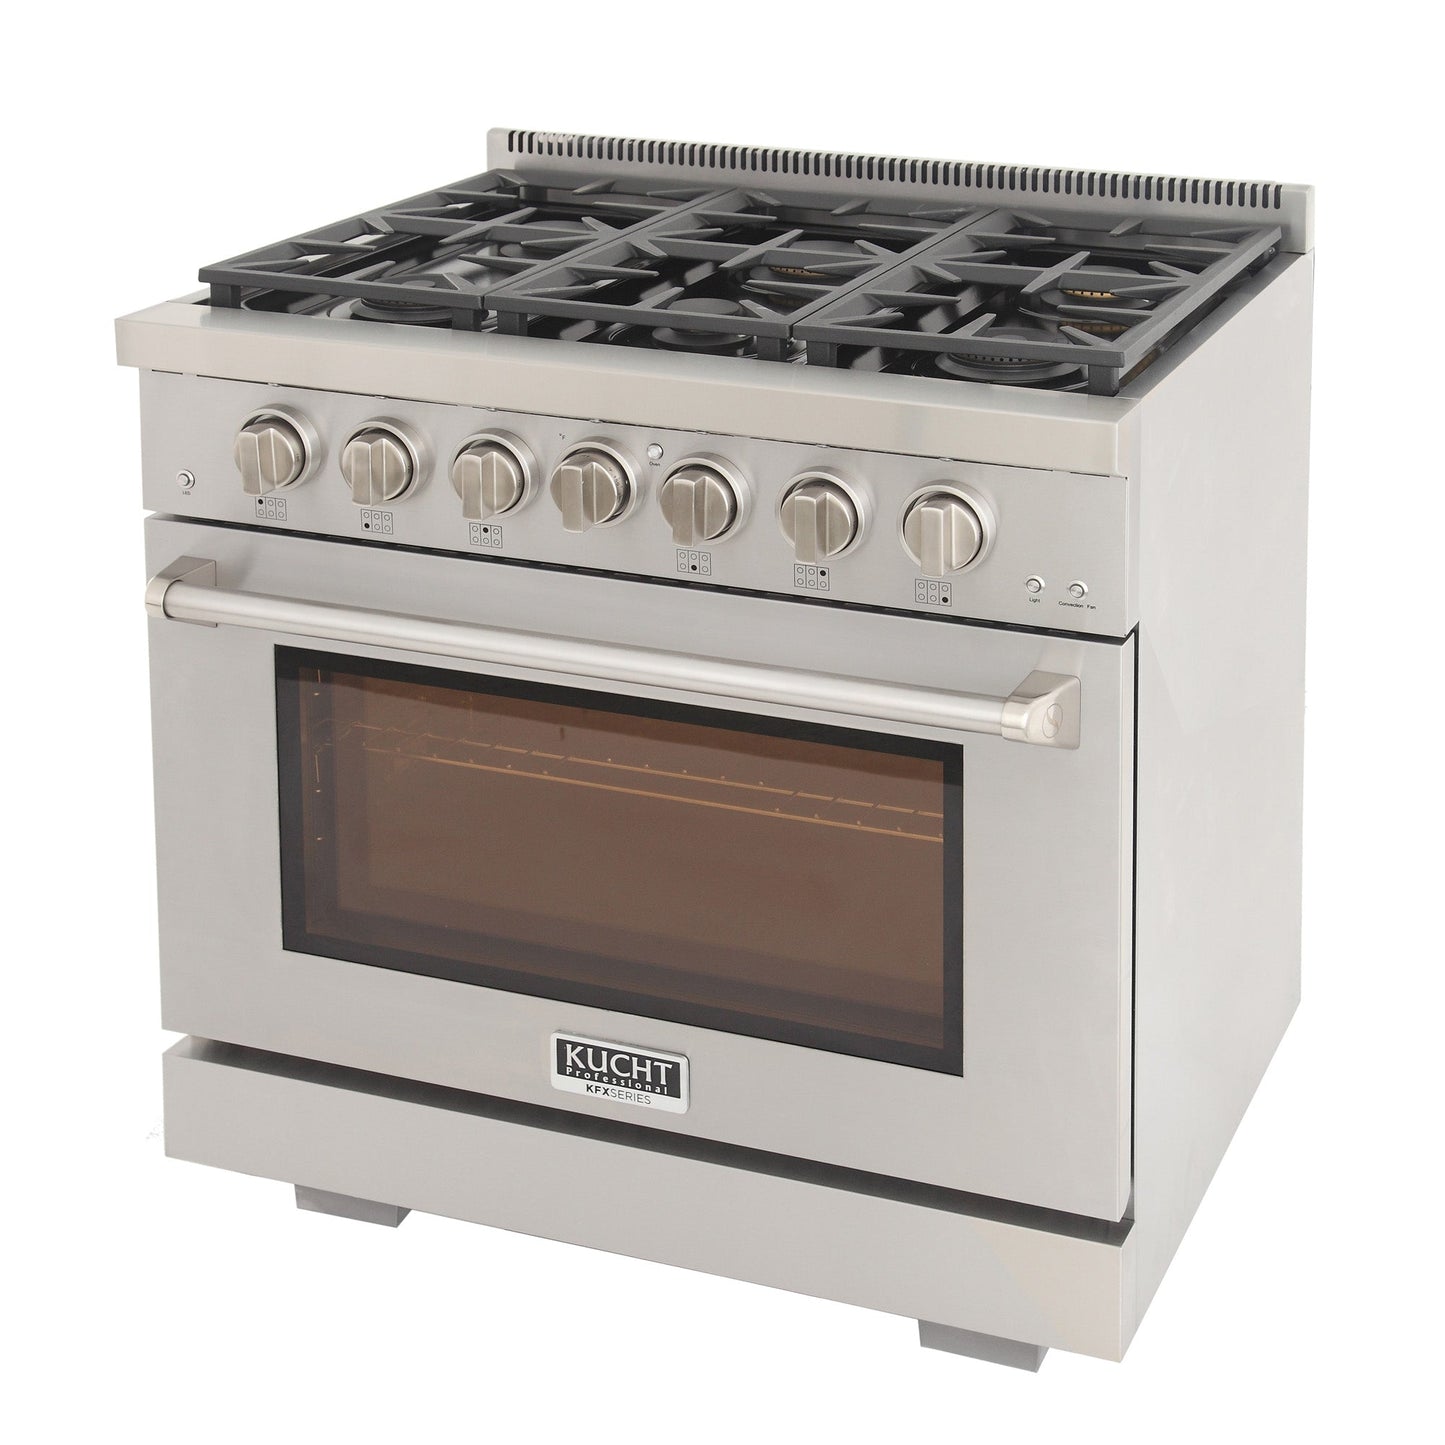 Kucht KFX Series 36" Freestanding Propane Gas Range With 6 Burners and Classic Silver Knobs